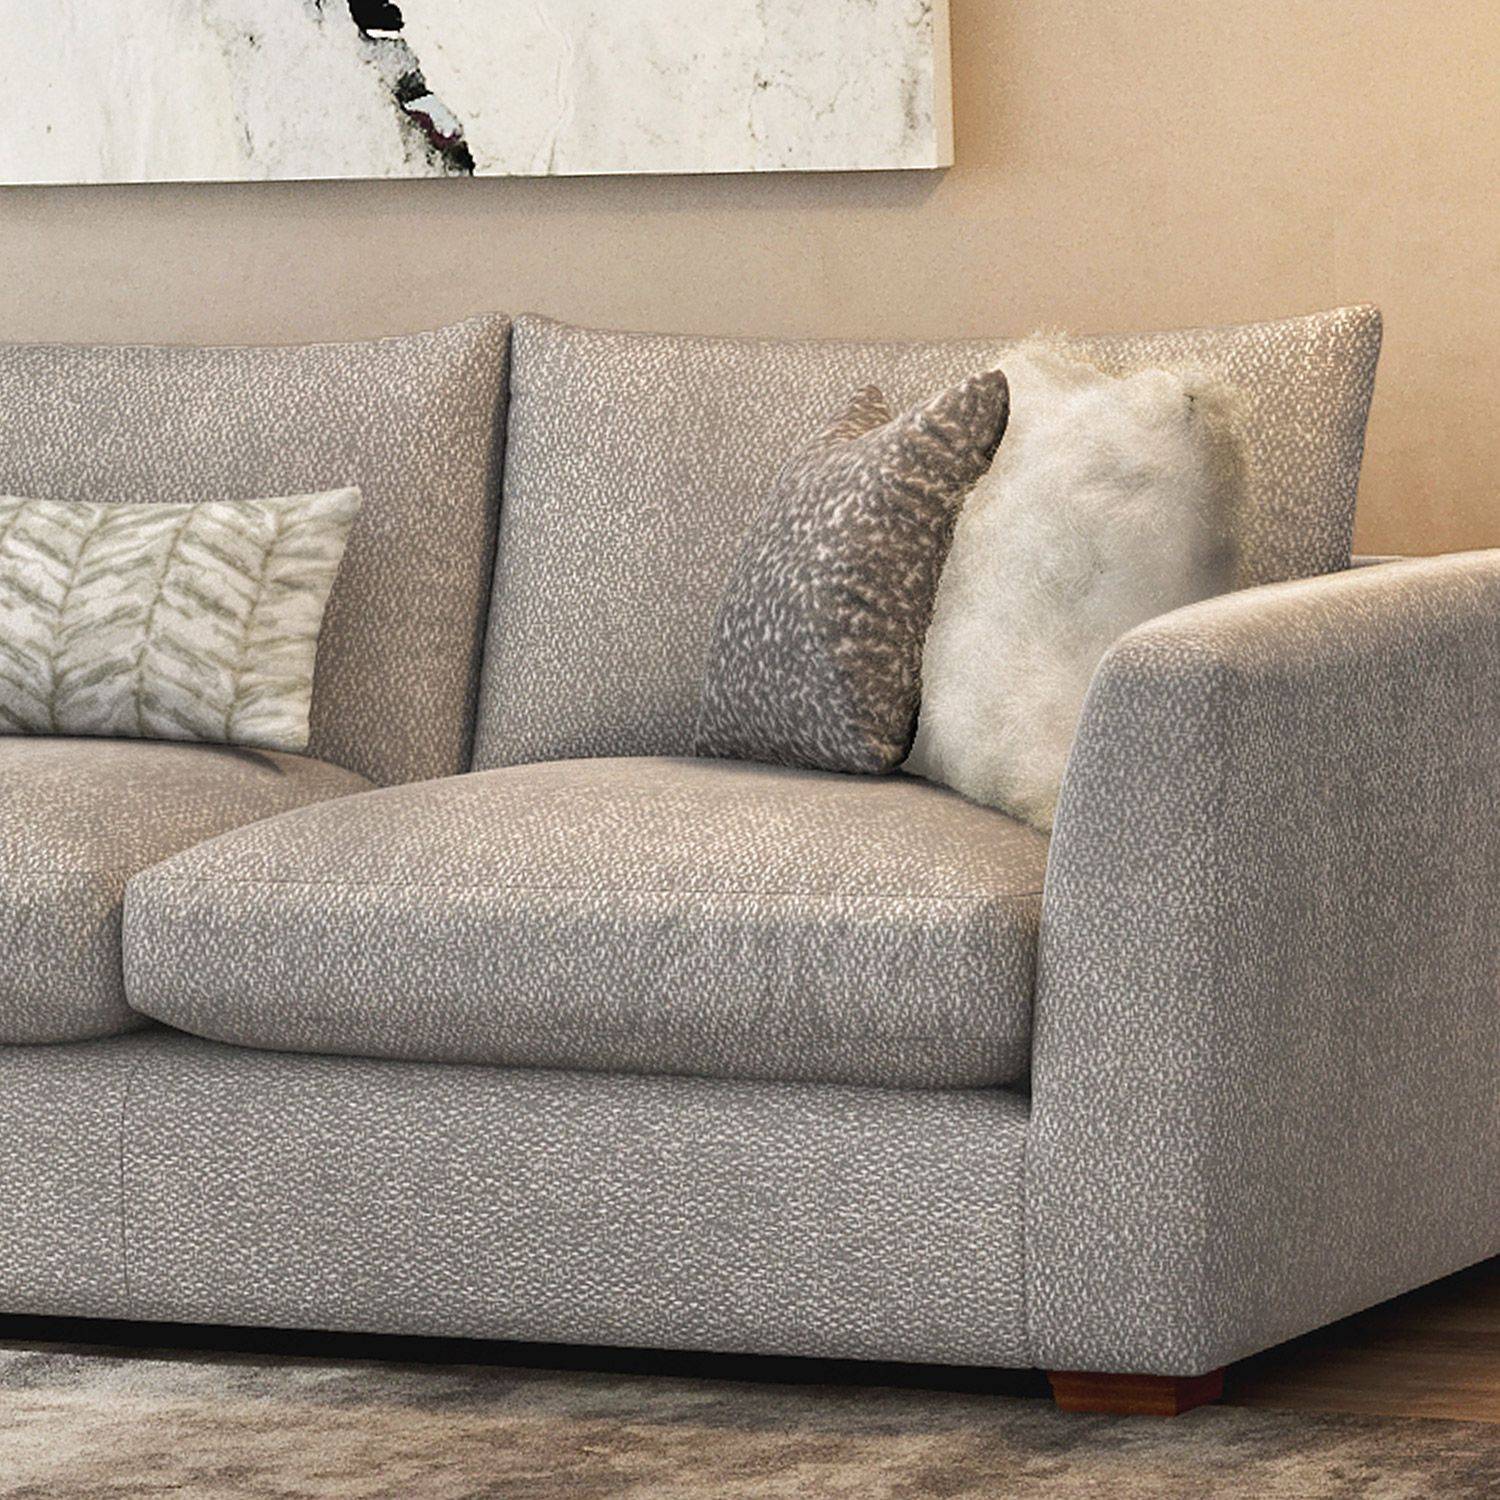 Aubrey Sofa Collection - Shop With Us Online At www.bfhome.co.uk